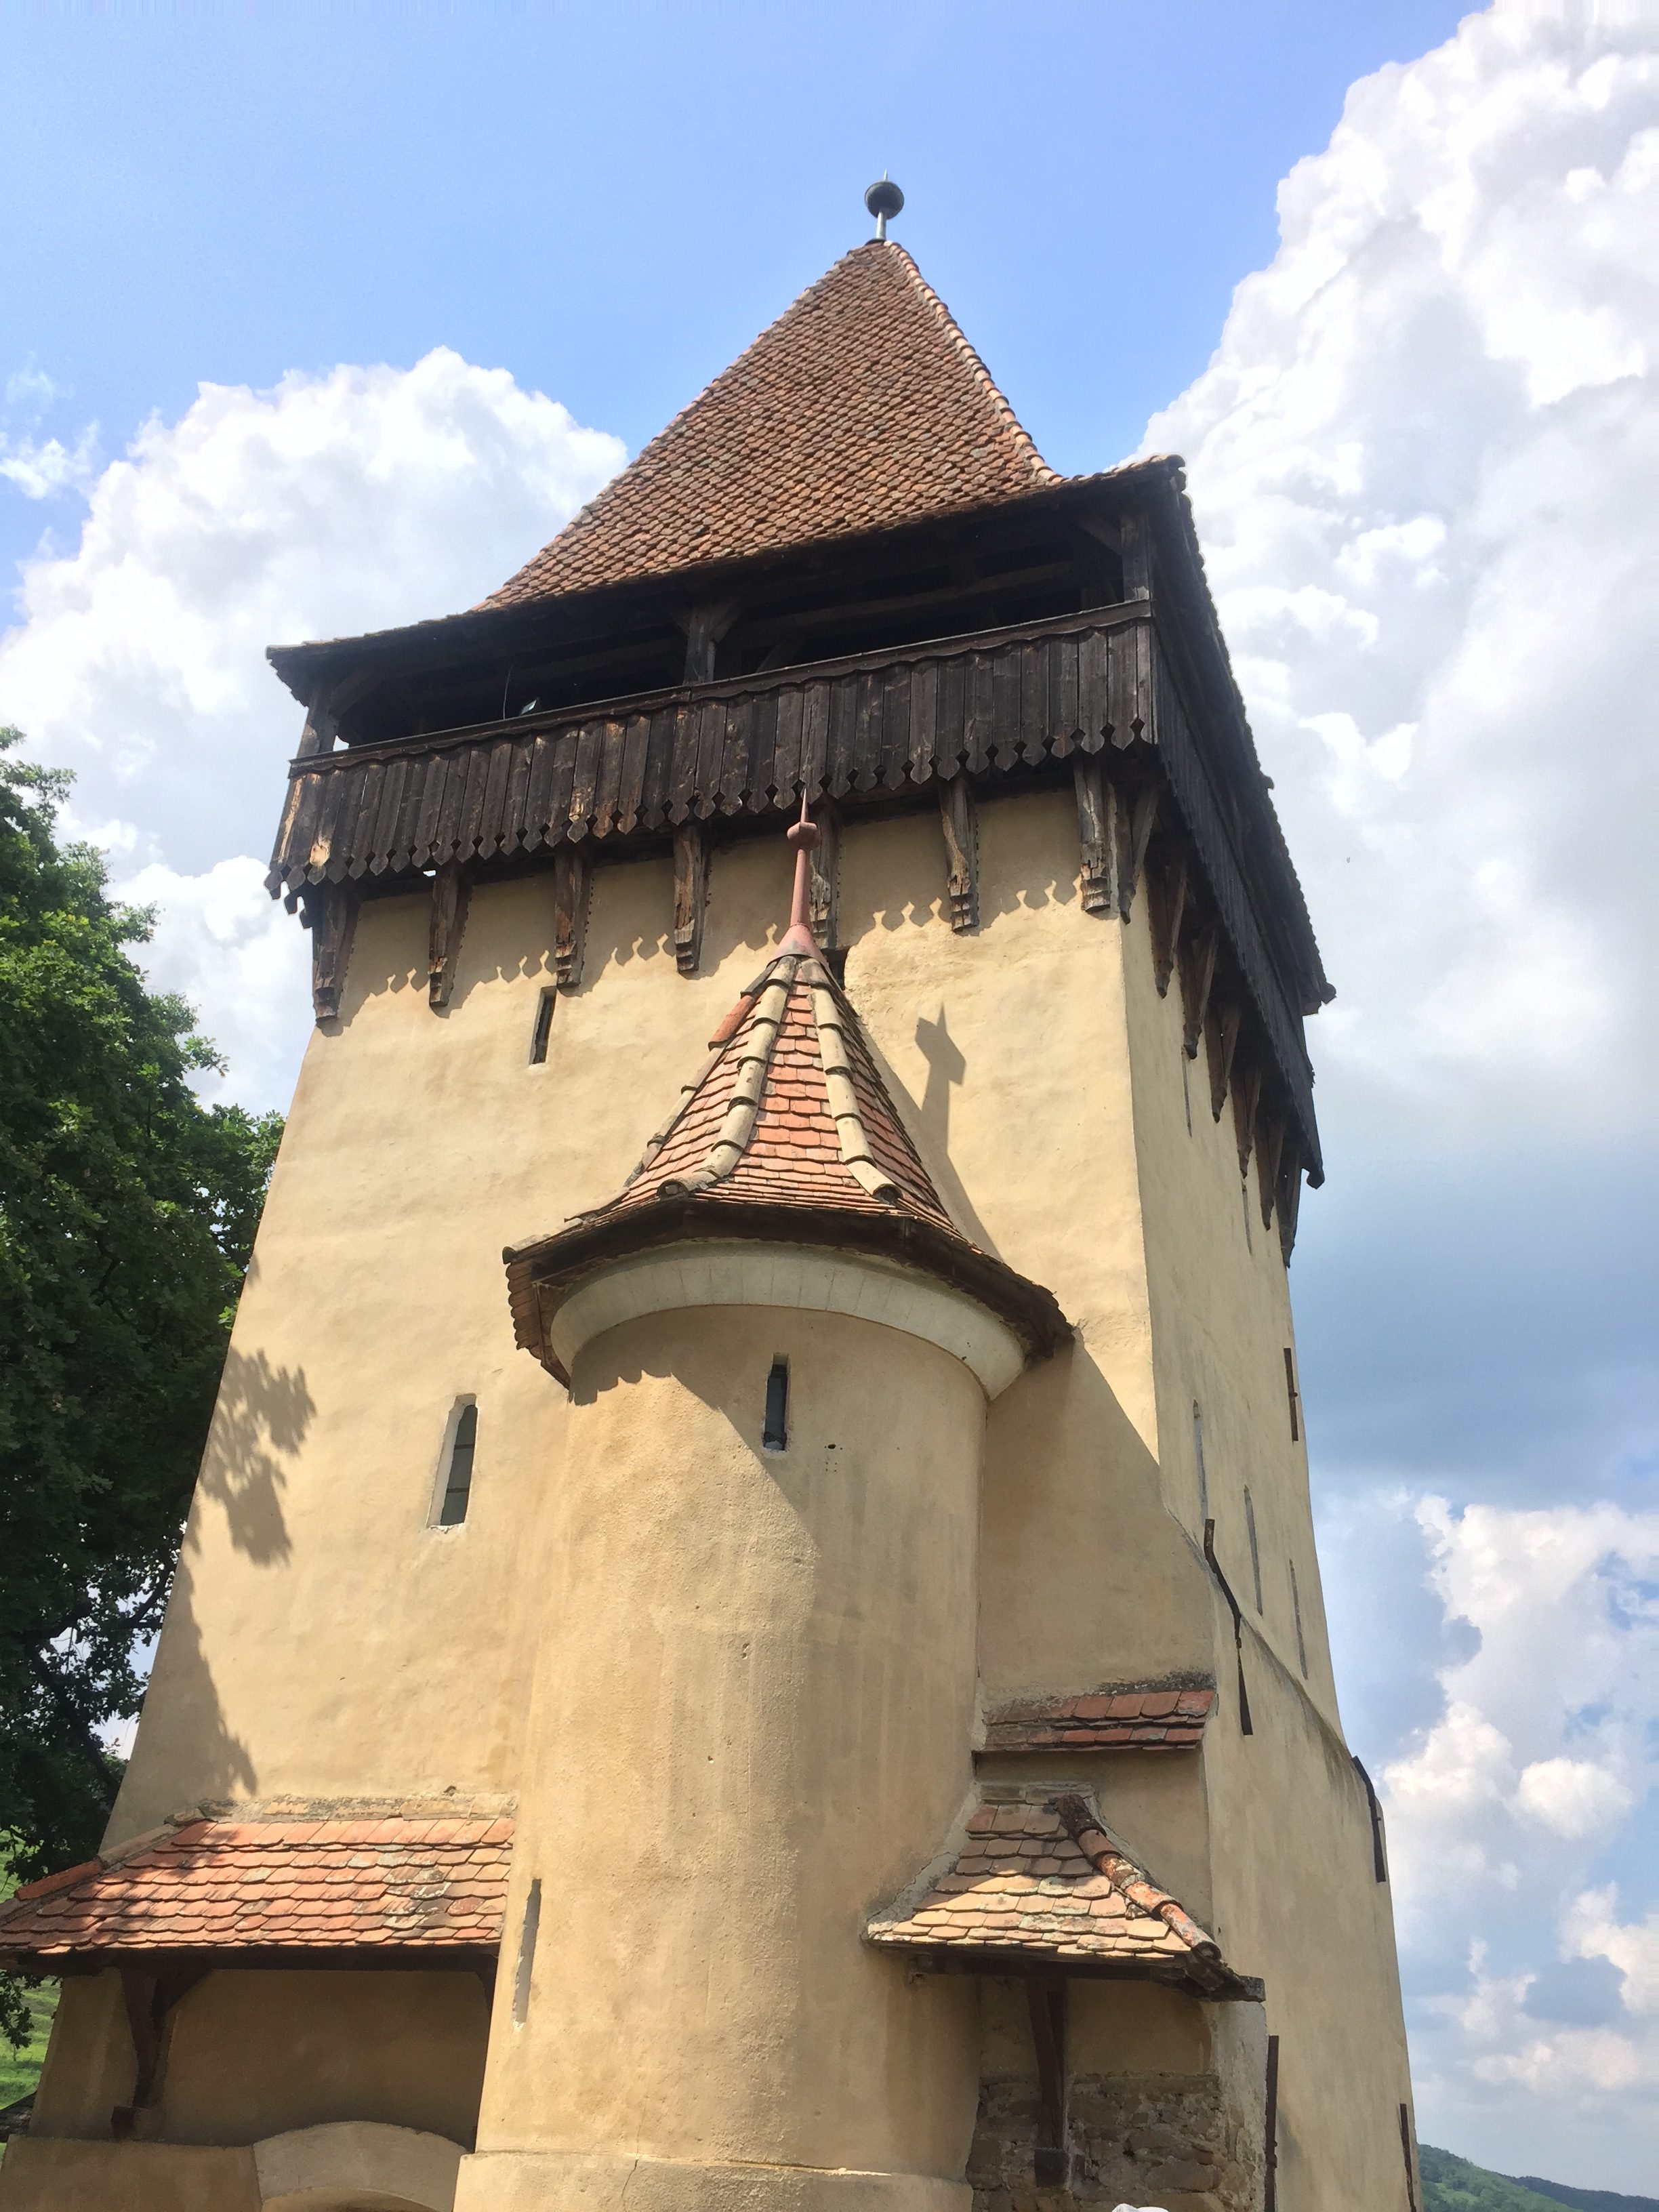 Tower within the fortified church